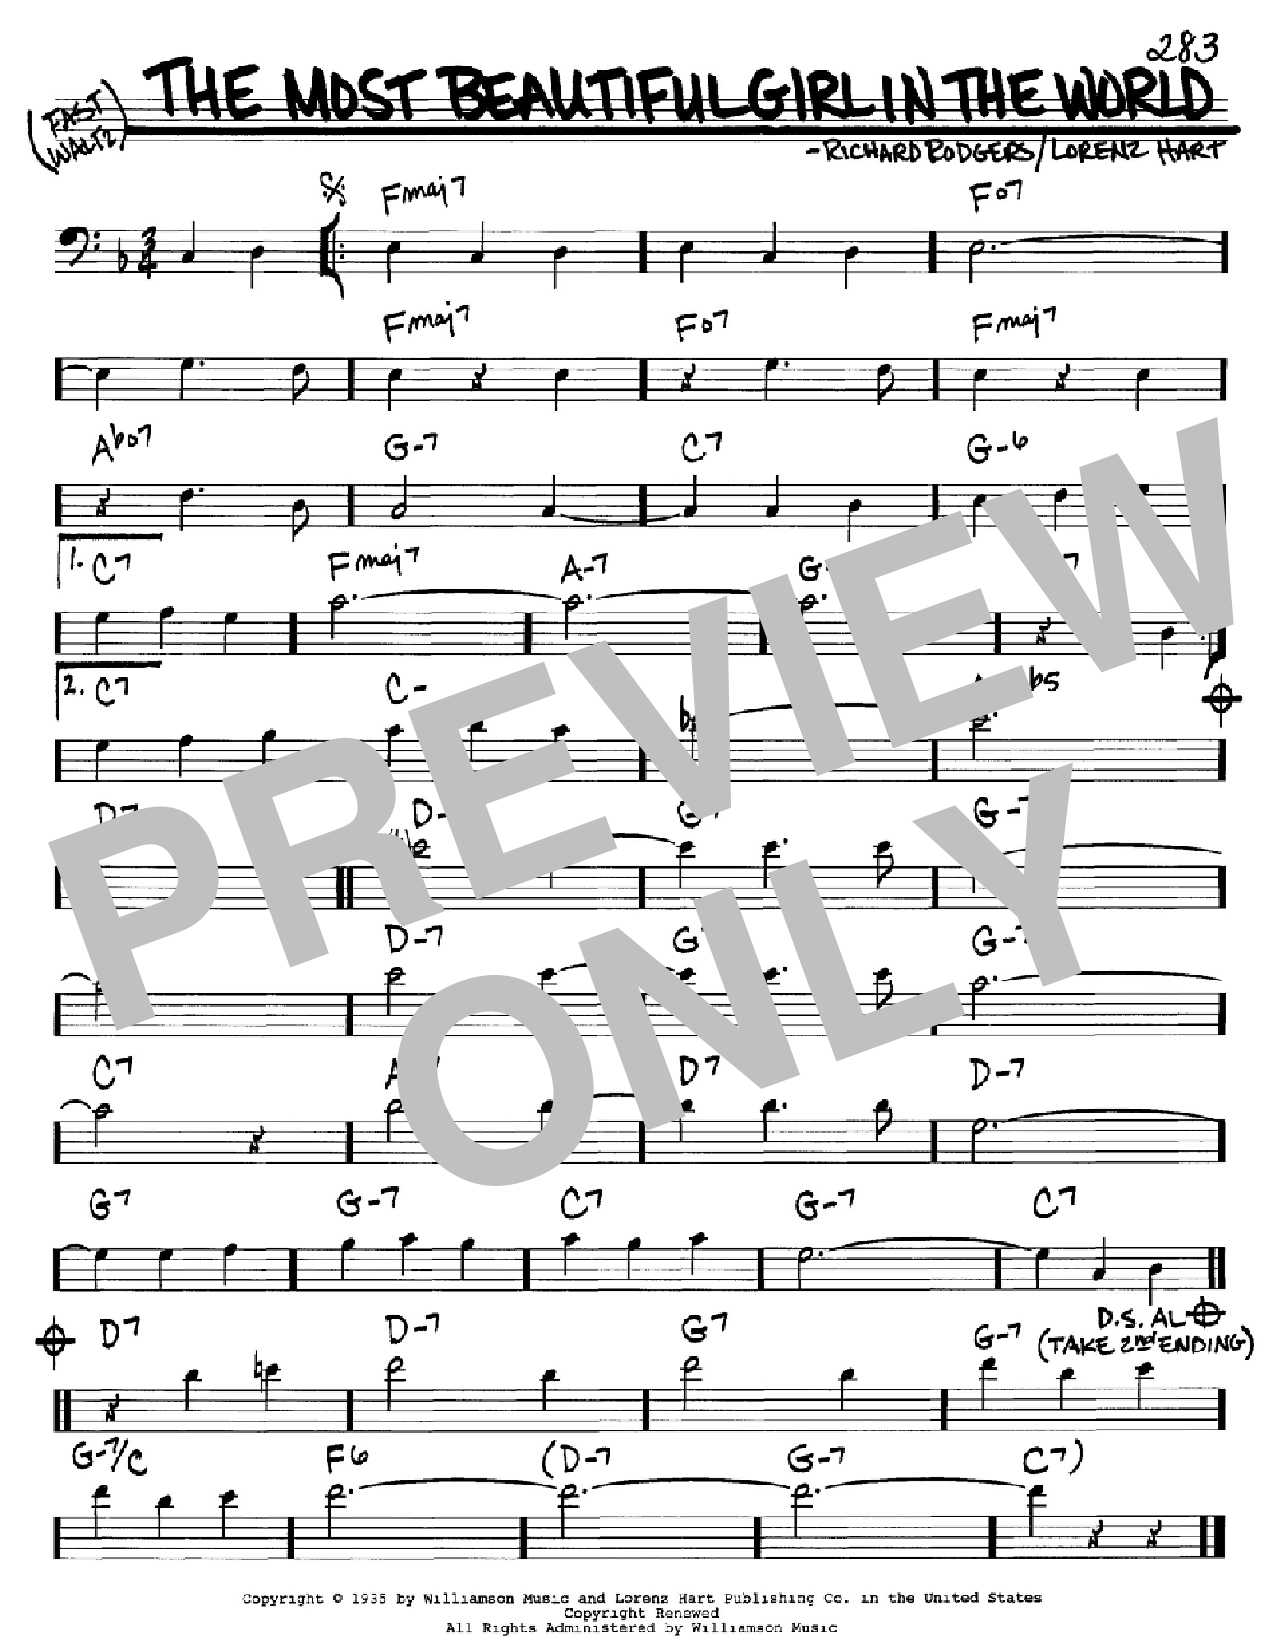 Download Rodgers & Hart The Most Beautiful Girl In The World Sheet Music